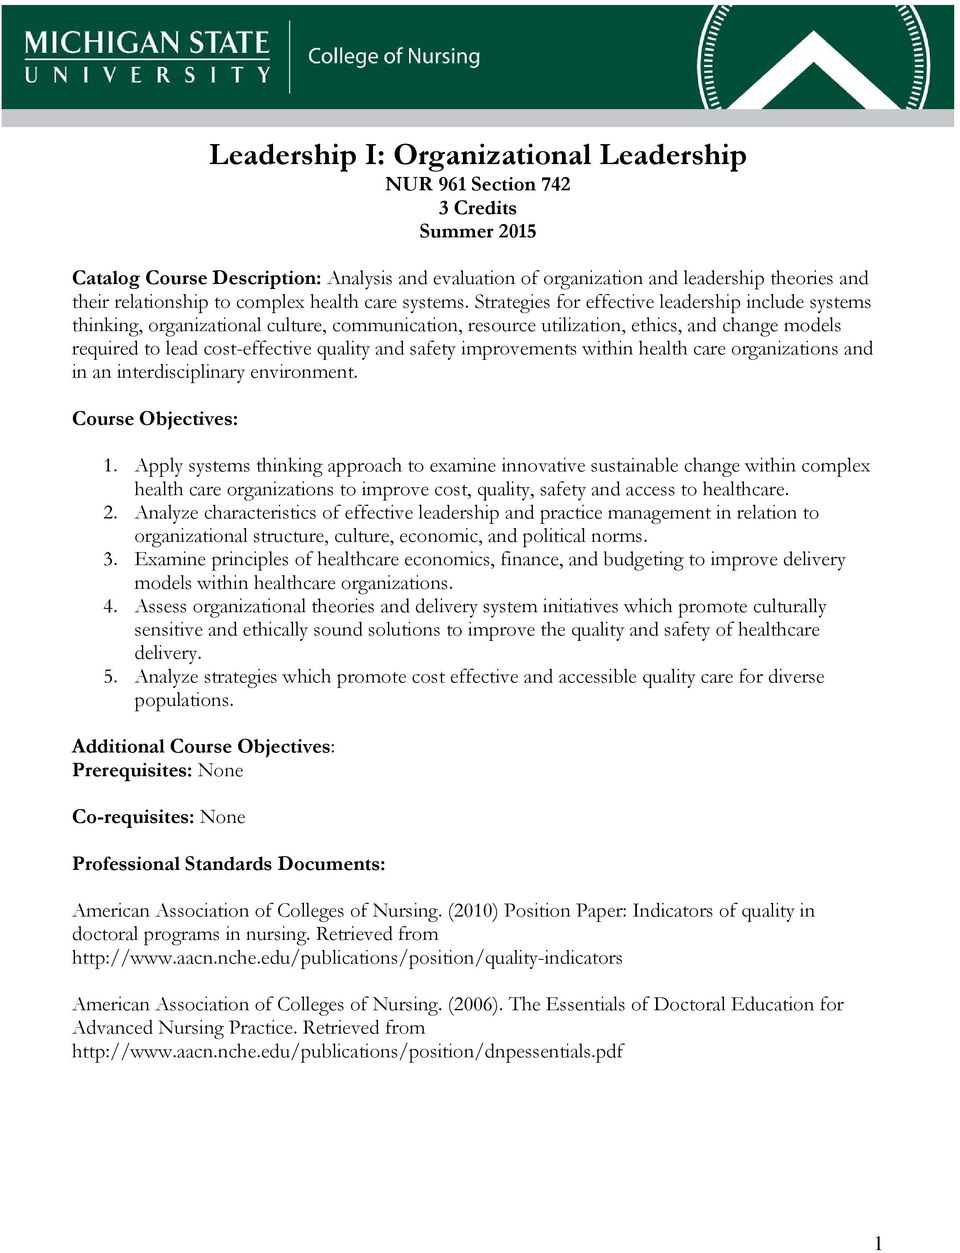 Strategies for effective leadership include systems thinking, organizational culture, communication, resource utilization, ethics, and change models required to lead cost-effective quality and safety